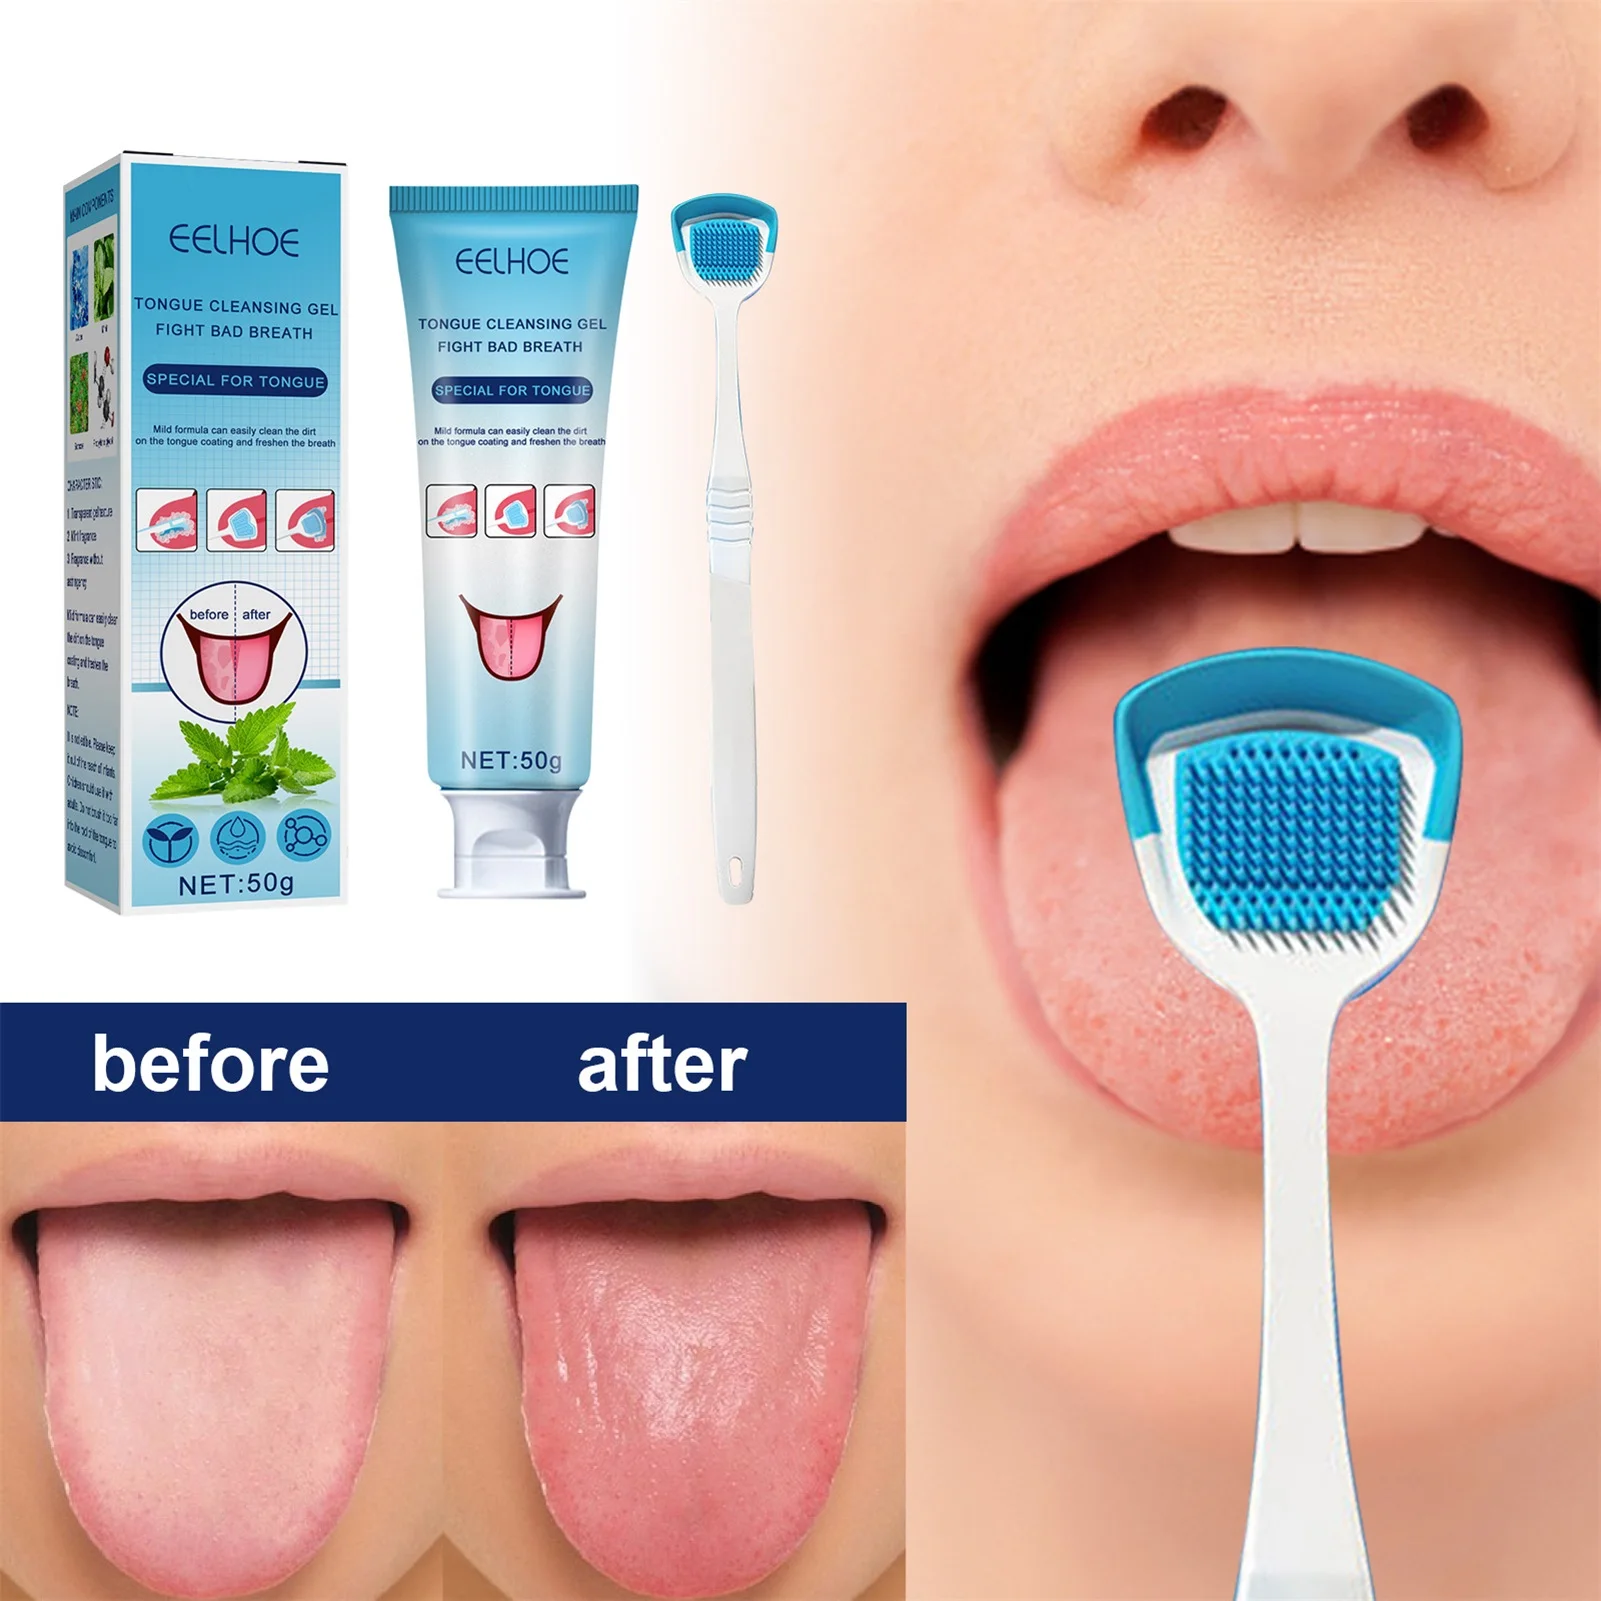 

Tongue Cleansing Gel with Silicone Tongue Scraper Brush Cleaning Set Tongue Cleaner Mint Freshen Breath Removing Tongue Coating